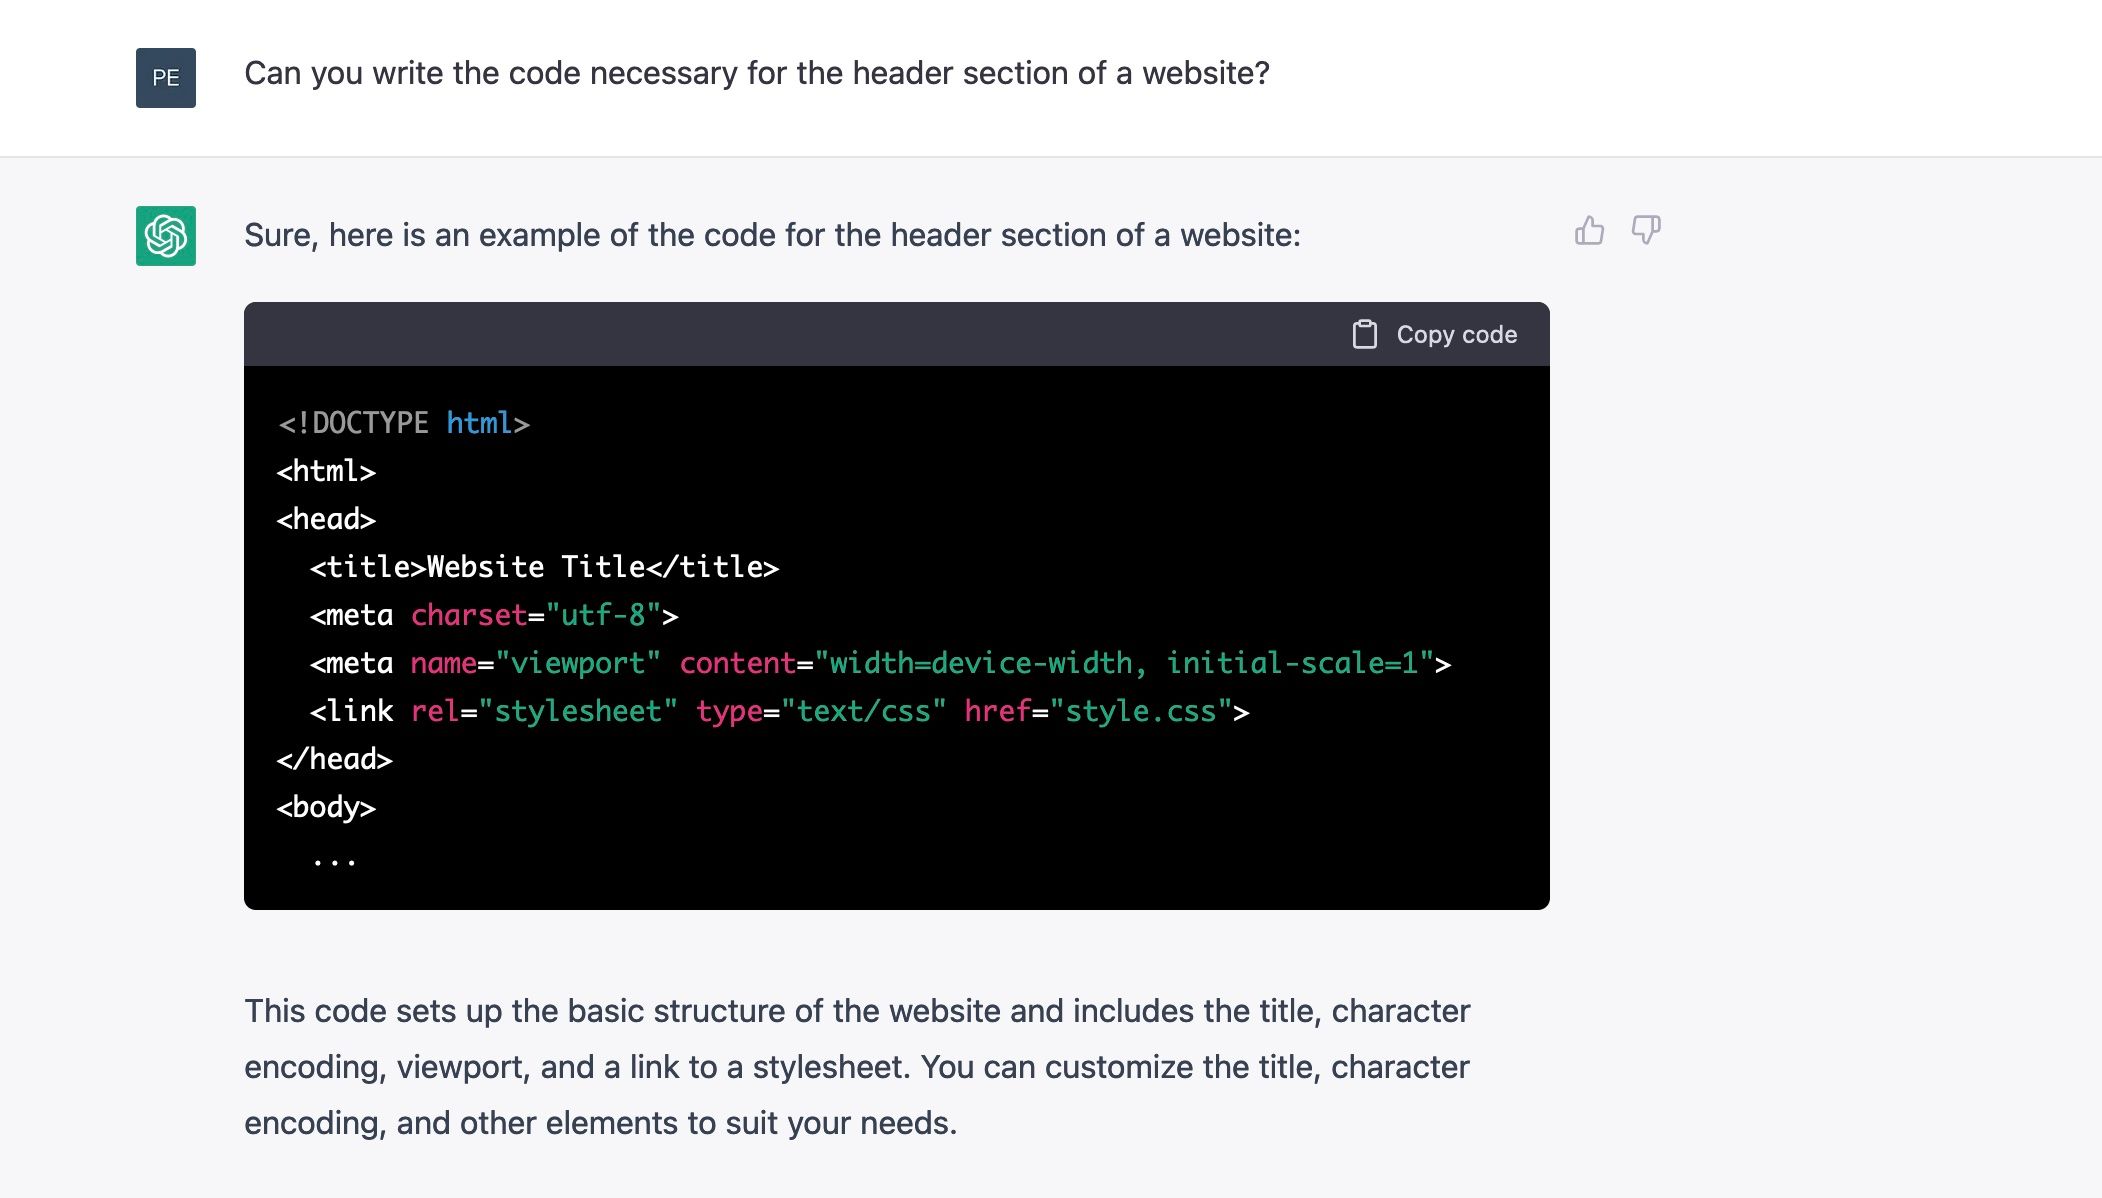 ChatGPT gives an example of how to code a website header section